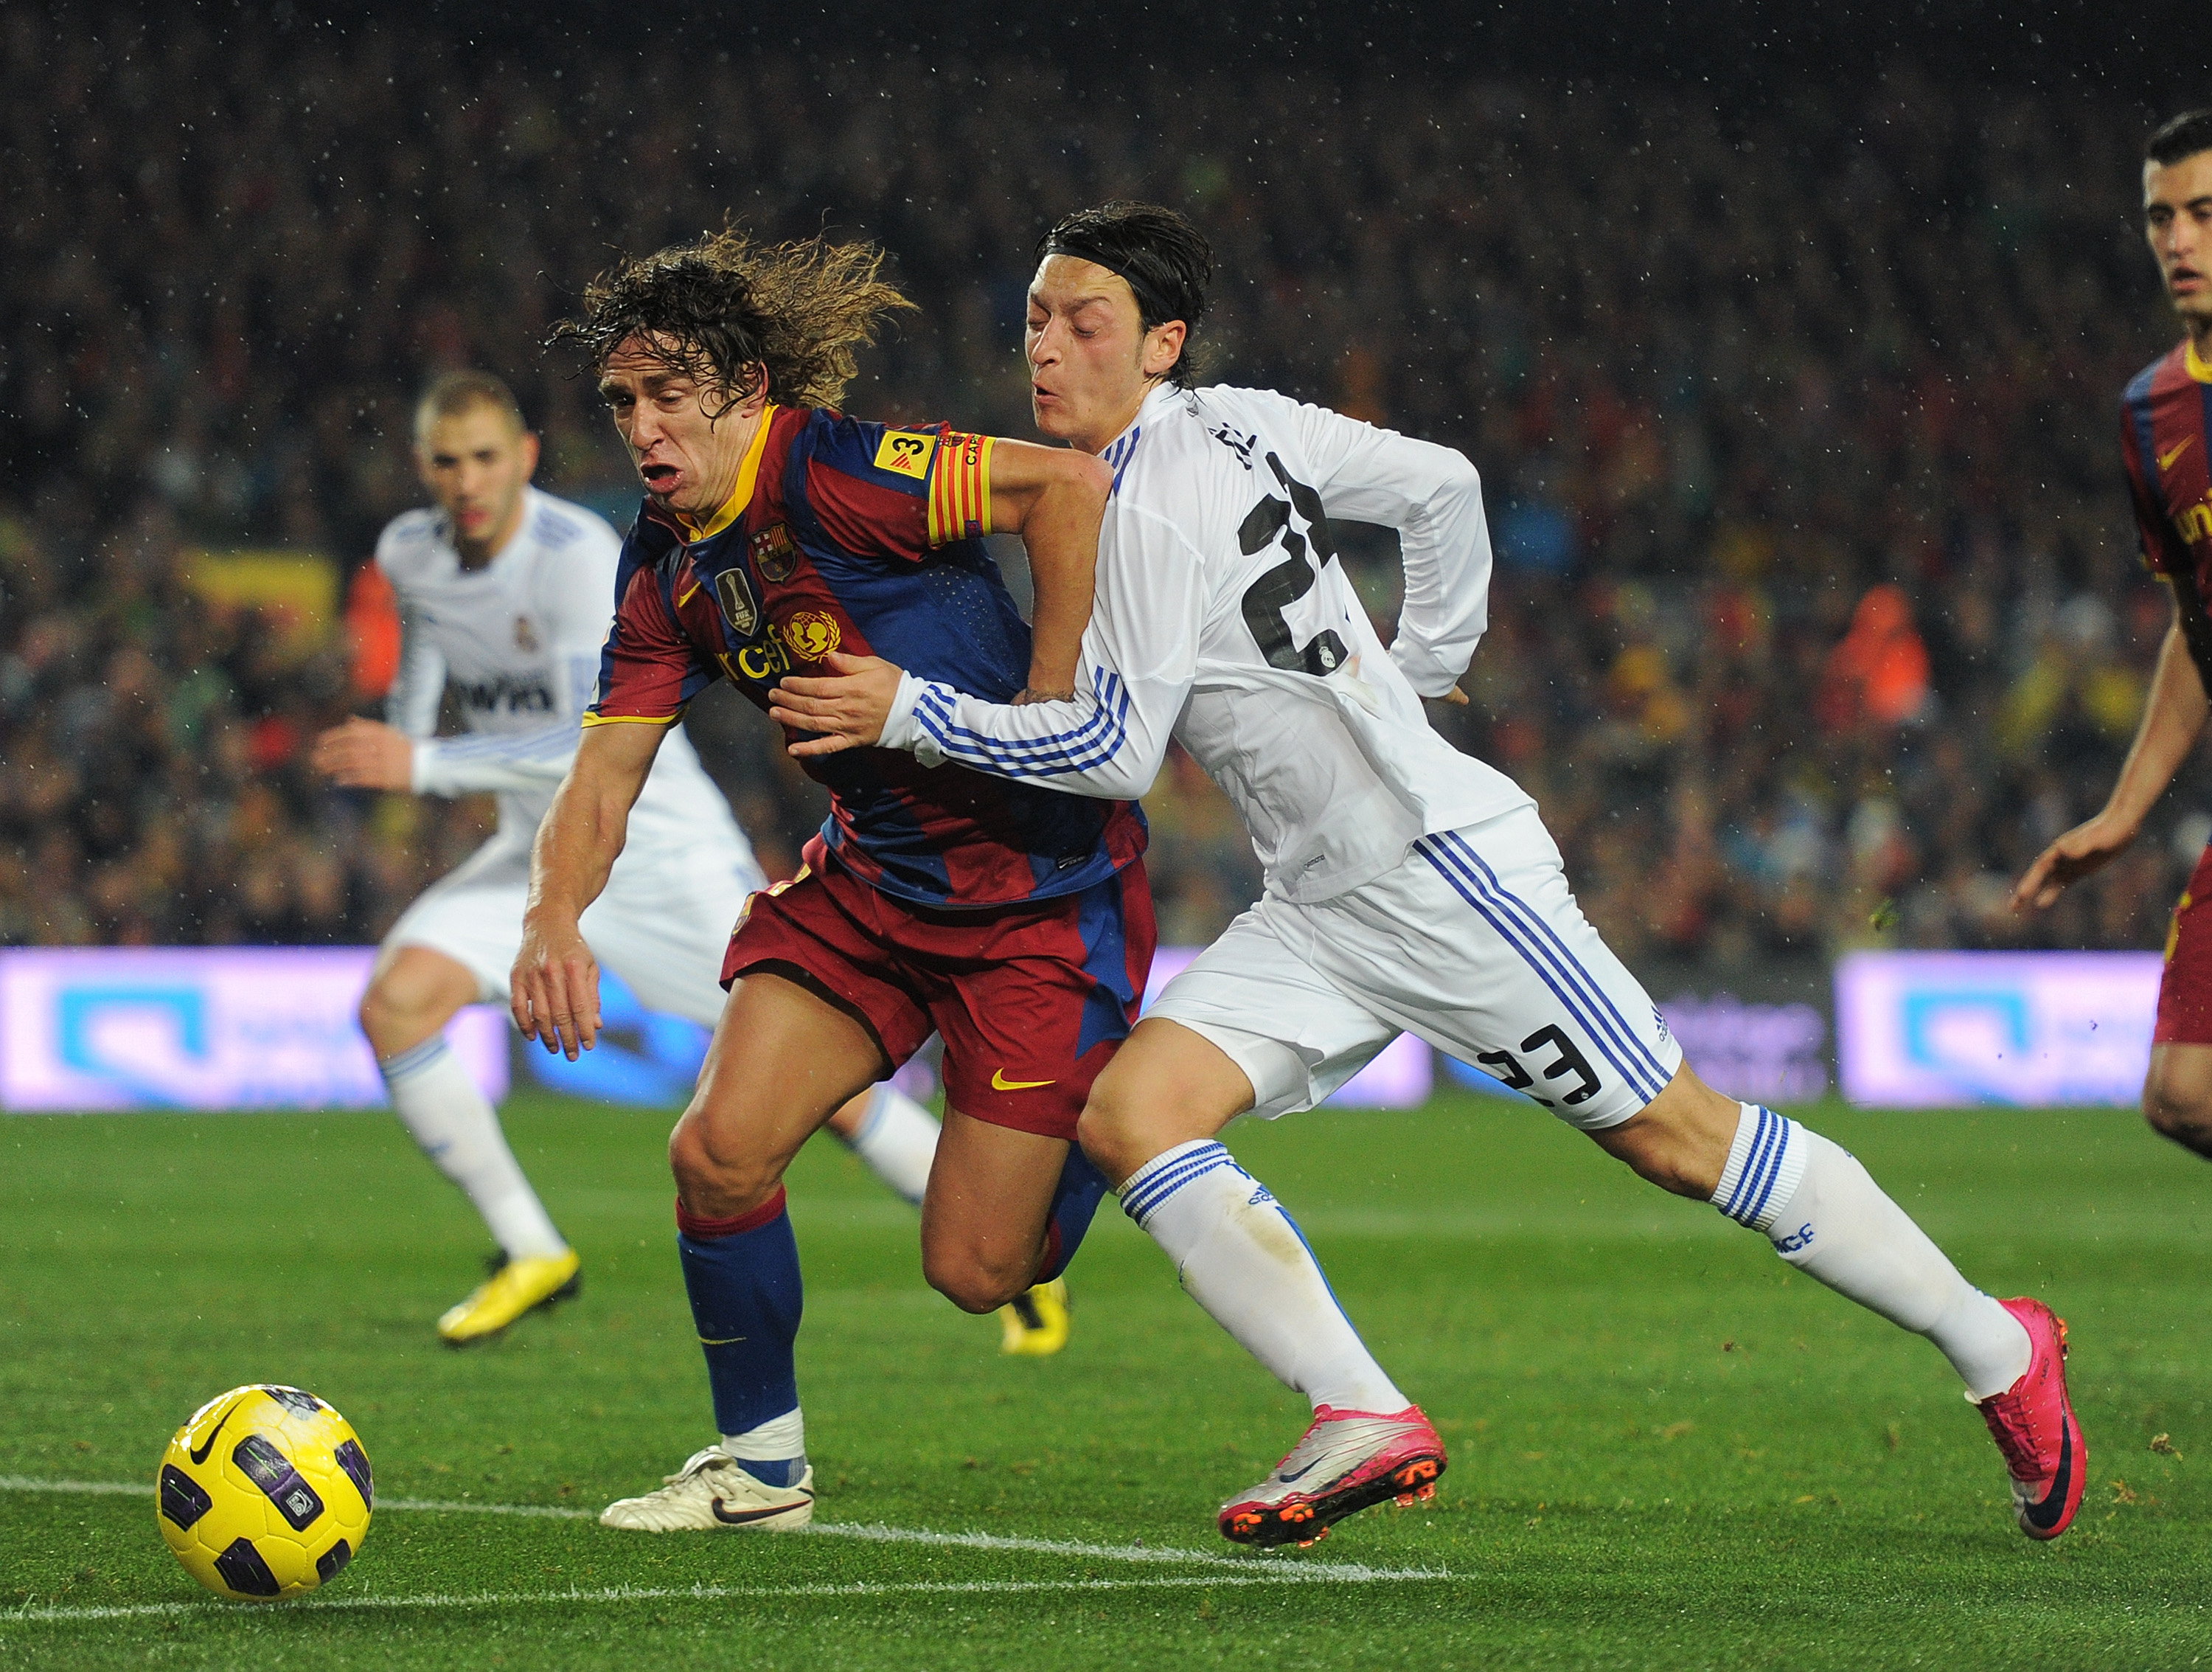 BARCELONA, SPAIN - NOVEMBER 29:  Mesut Ozil (R) of Real Madrid duels for the ball with Carles Puyol of Barcelona during the la liga match between Barcelona and Real Madrid at the Camp Nou stadium on November 29, 2010 in Barcelona, Spain.  (Photo by Jasper